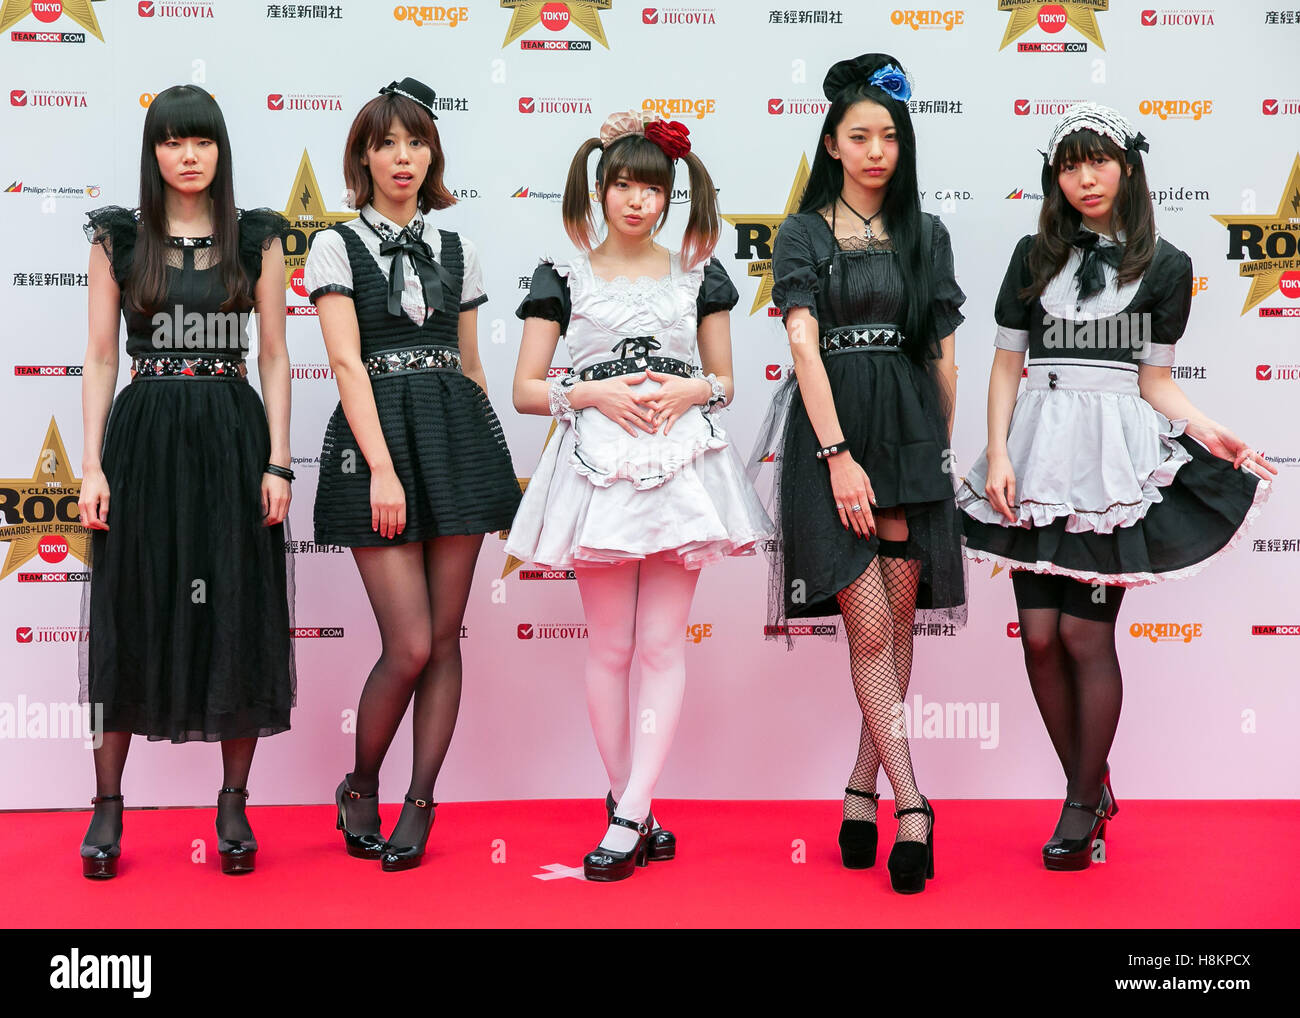 Tokyo, Japan - Japanese female rock group BAND-MAID pose for photographers on the red carpet during the Classic Rock Awards 2016 at Ryougoku Kokugikan Stadium in Tokyo, Japan on November 11, 2016. © AFLO/Alamy Live News Stock Photo